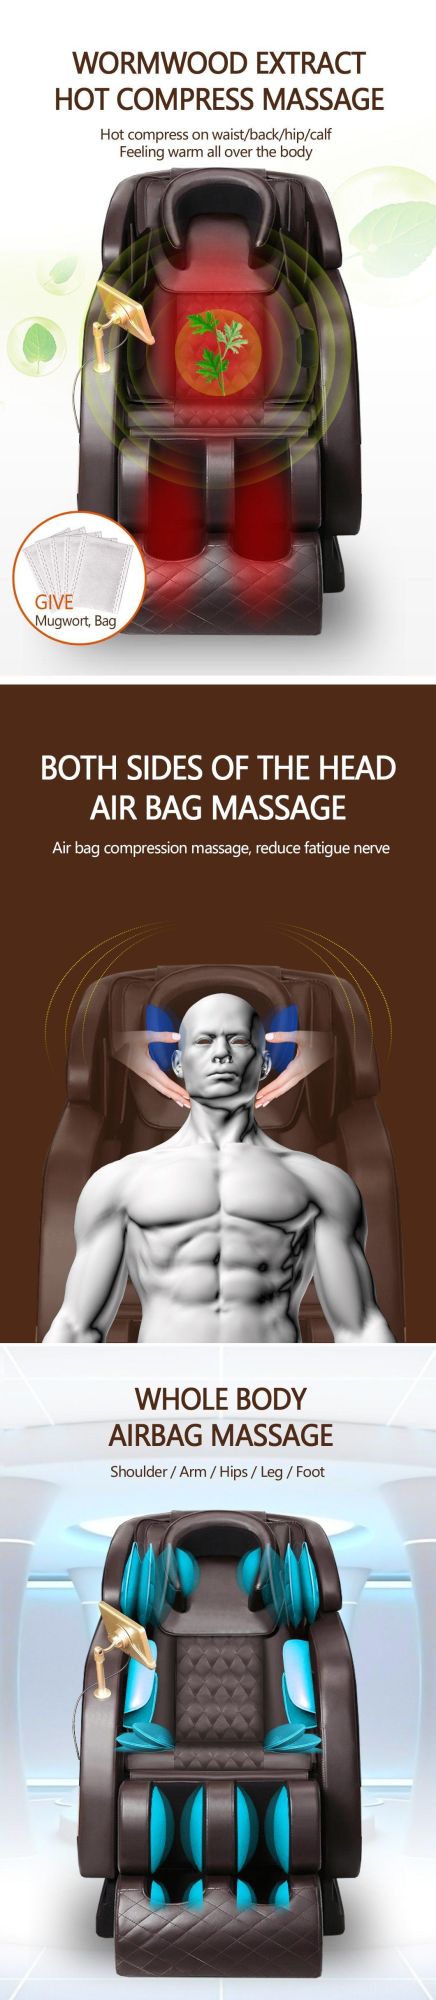 Wholesale Cheap Office High Quality Smart Head Foot Full Body Airbag Apressure Best Massage Equipment with Music Relaxing